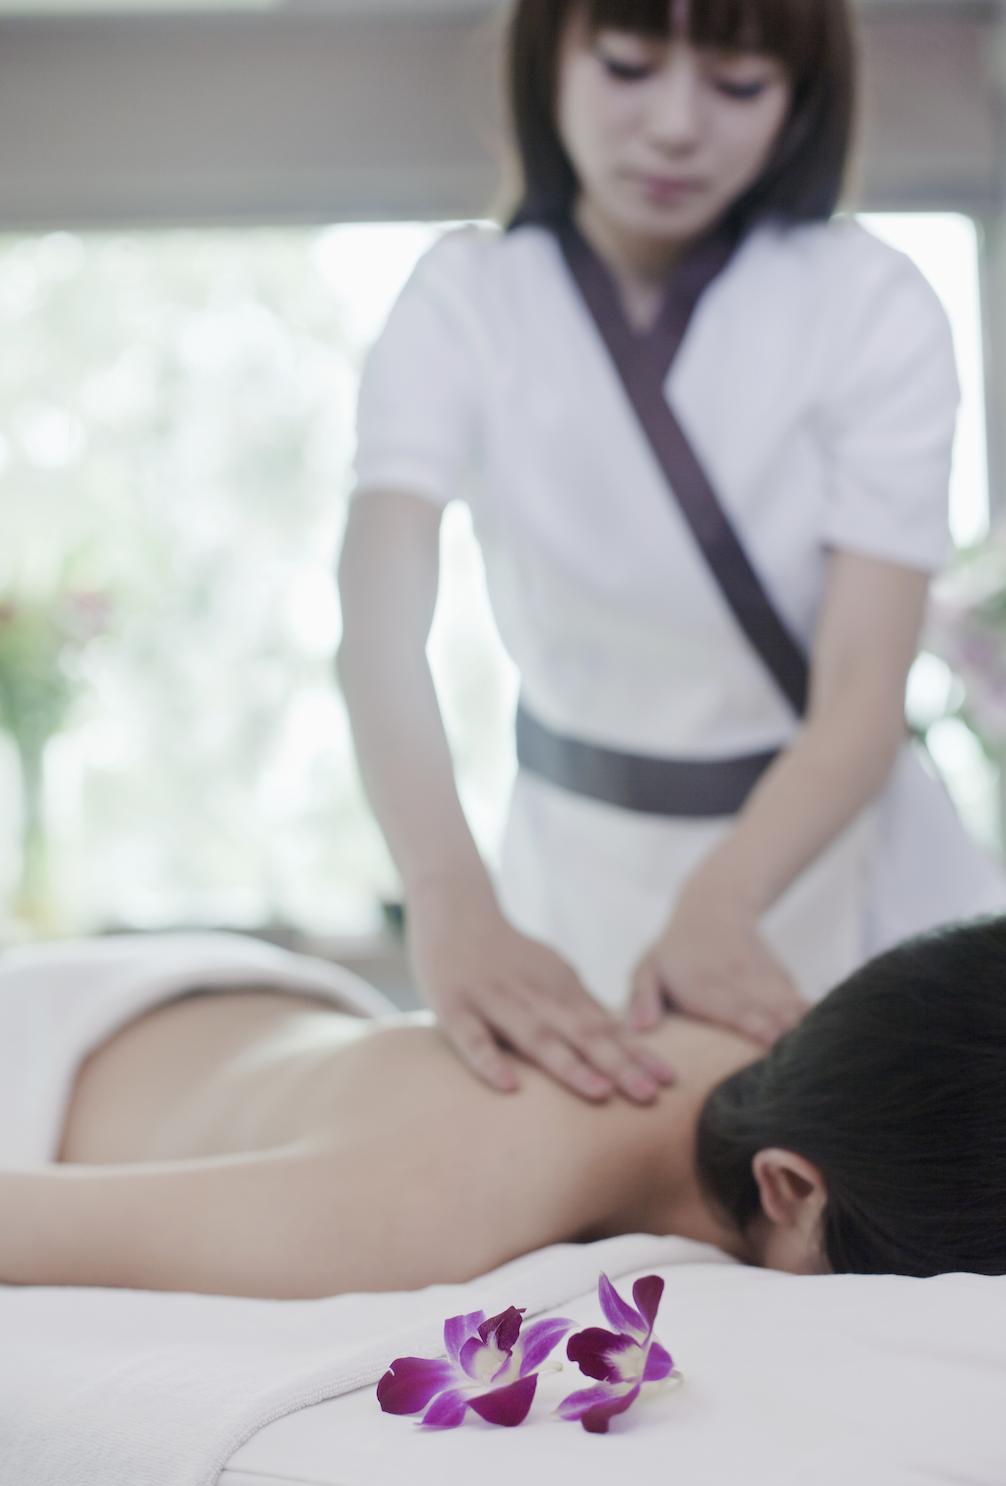 Images Wellspring Chinese Massage